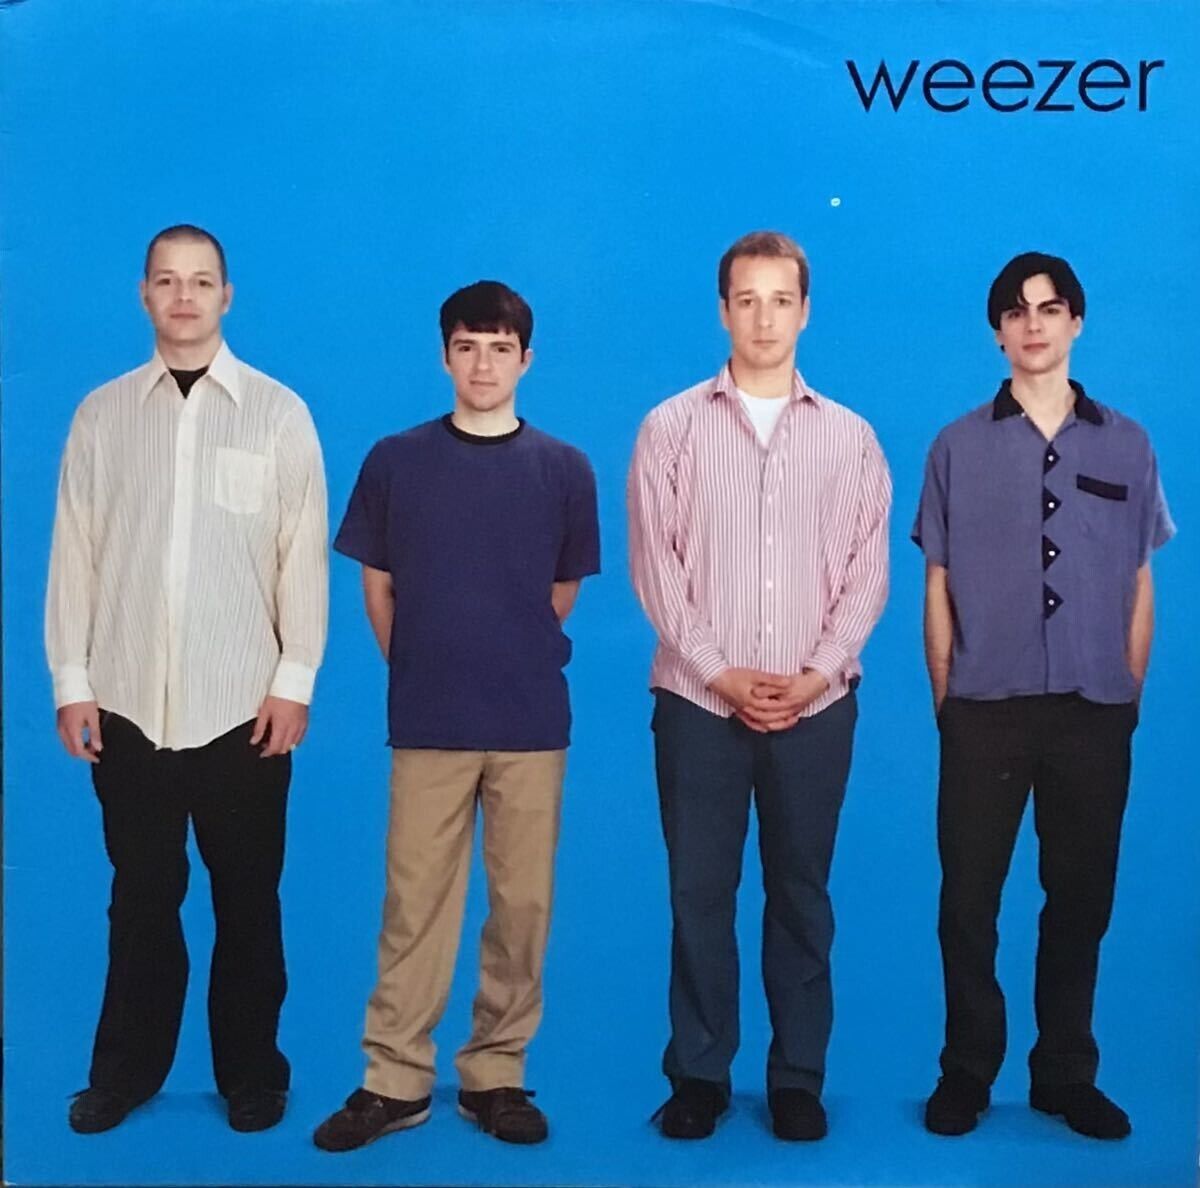 The+album+Weezer+%28commonly+known+as+the+Blue+Album%29%2C+was+released+on+May+10%2C+1994.+Image+courtesy+of+the+L.A.+Times.